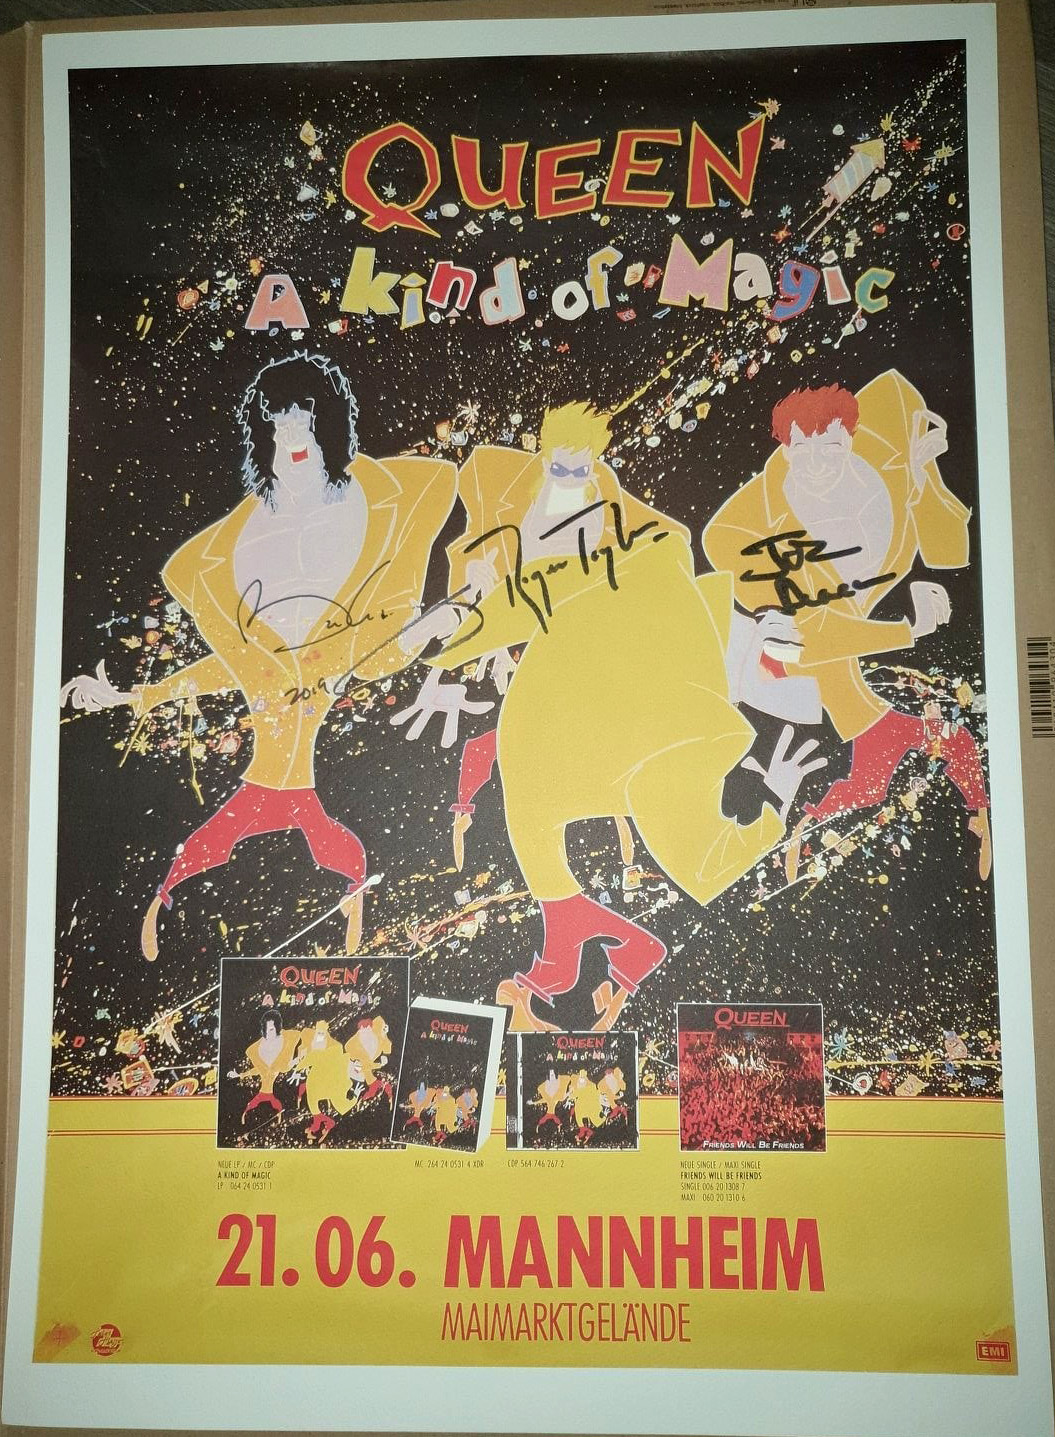 Queen in Mannheim on 21.06.1986 - autographed poster